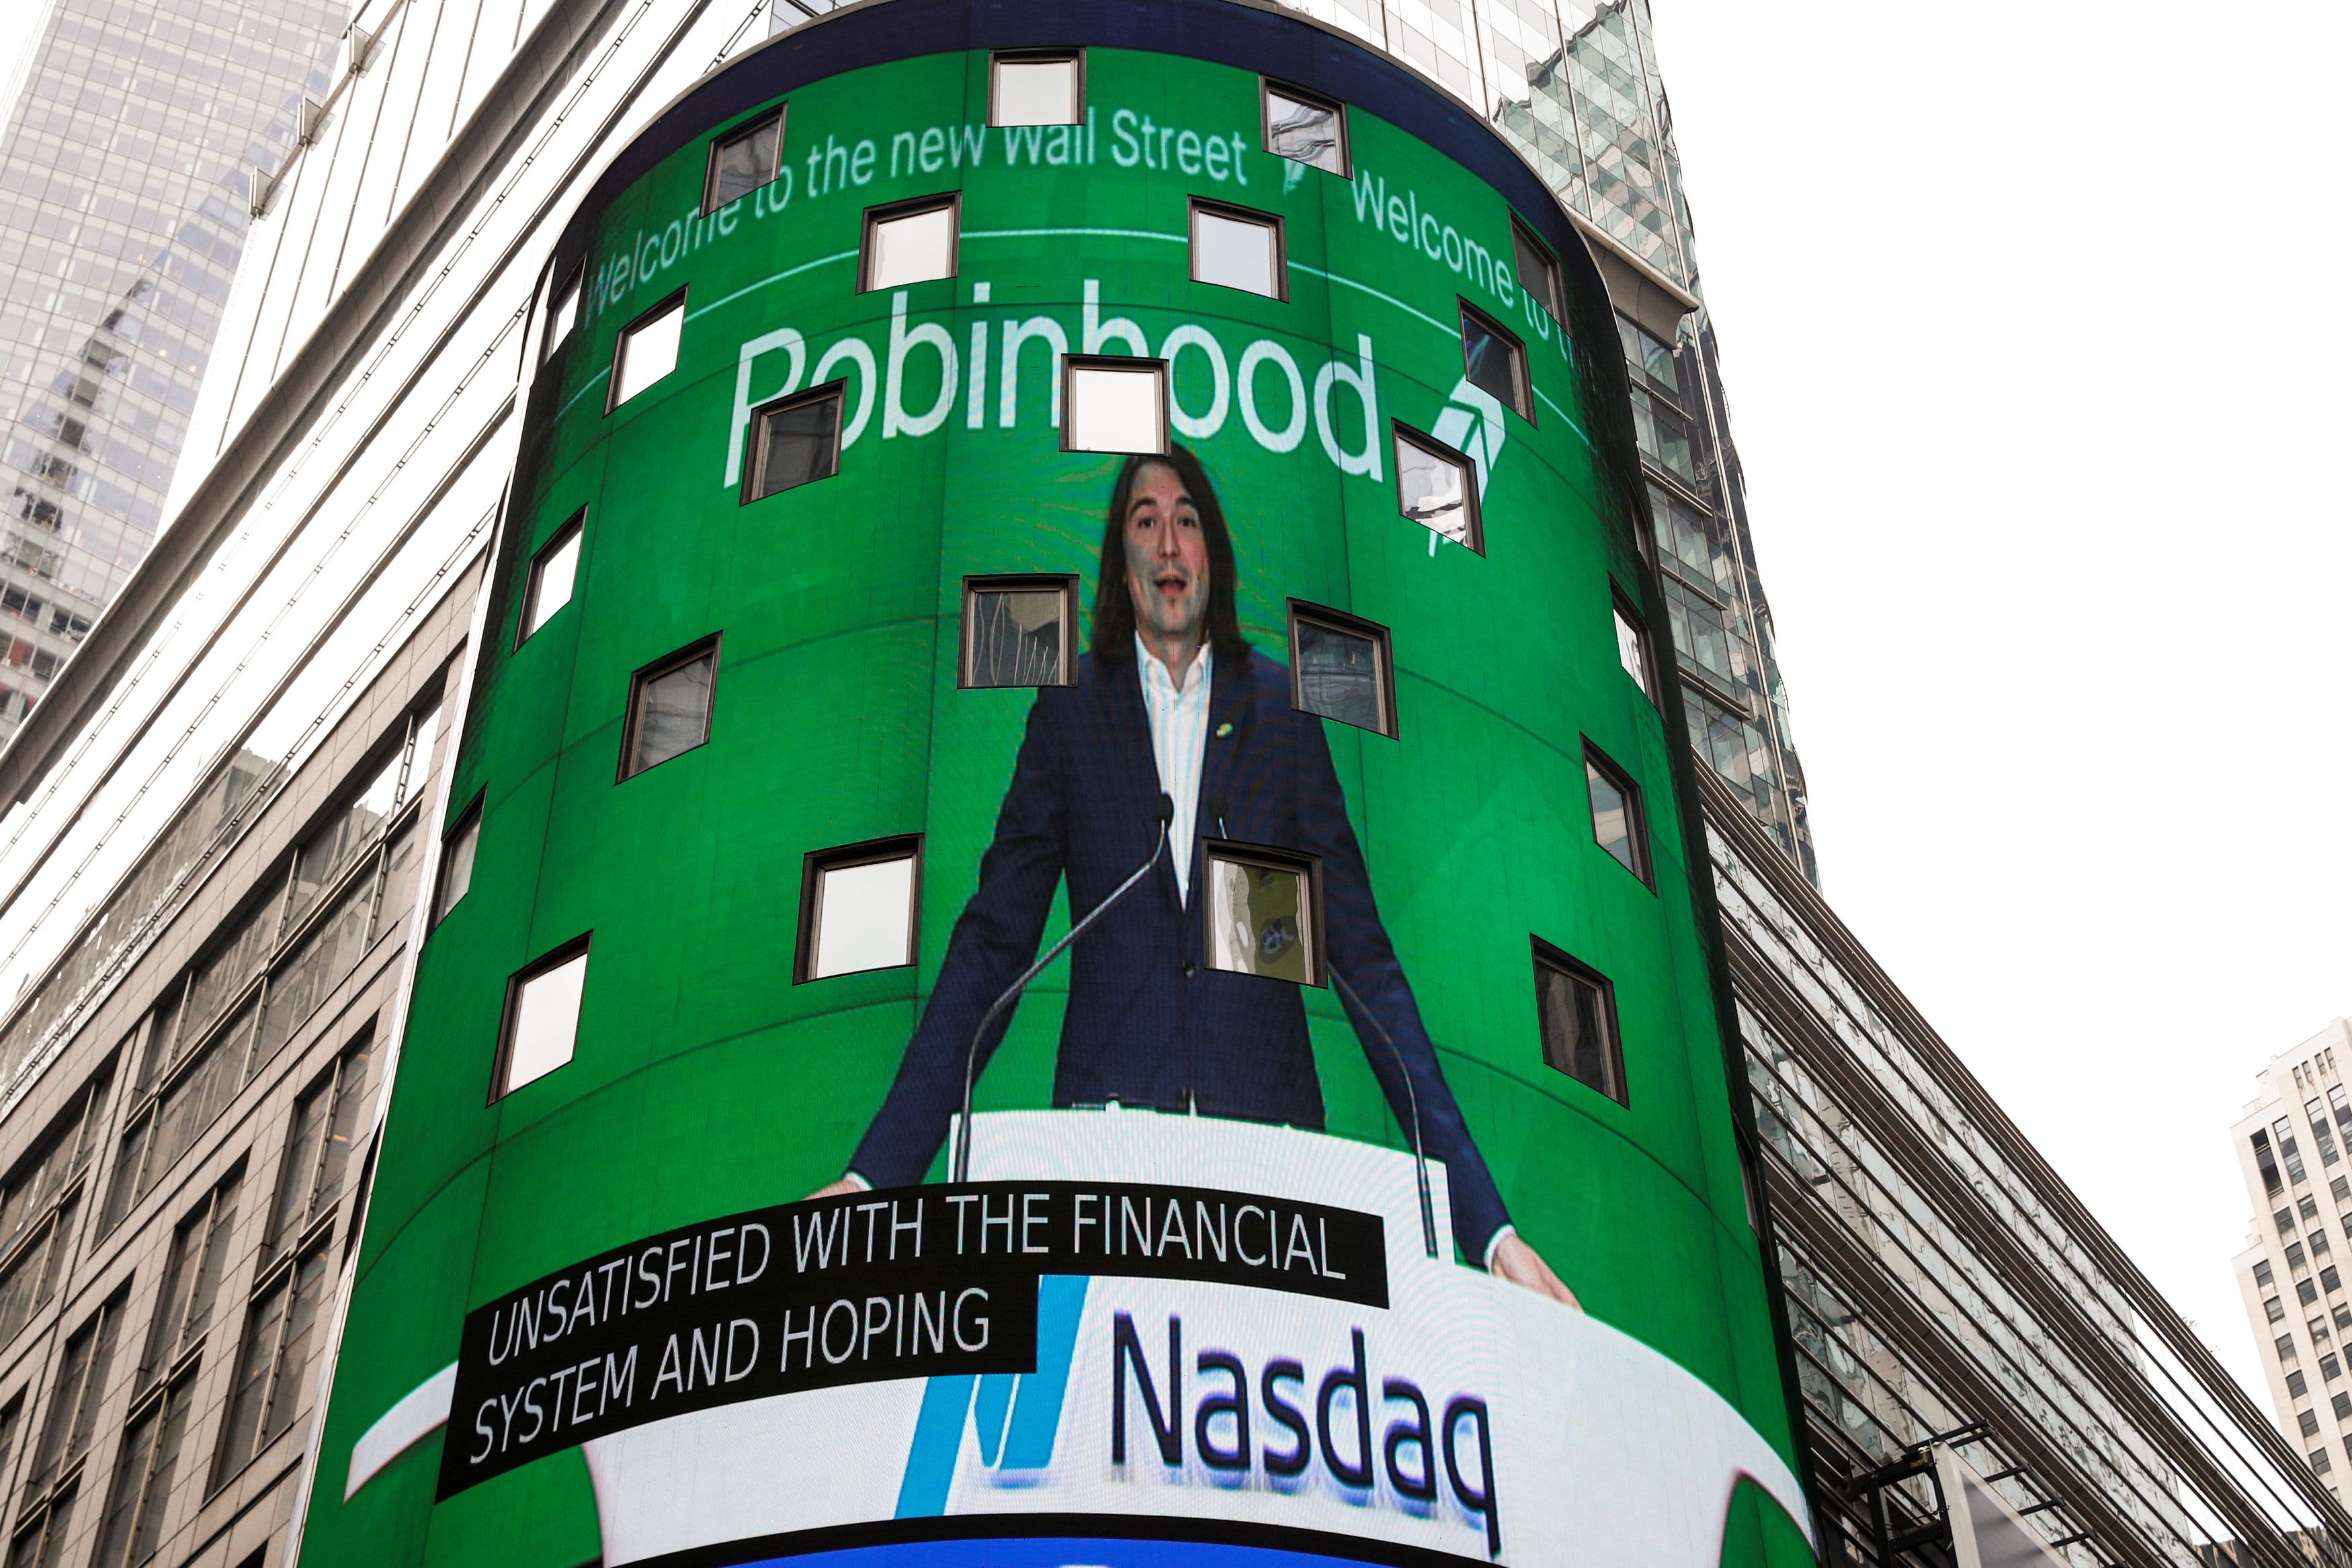 Airbnb stock on robinhood forex video game